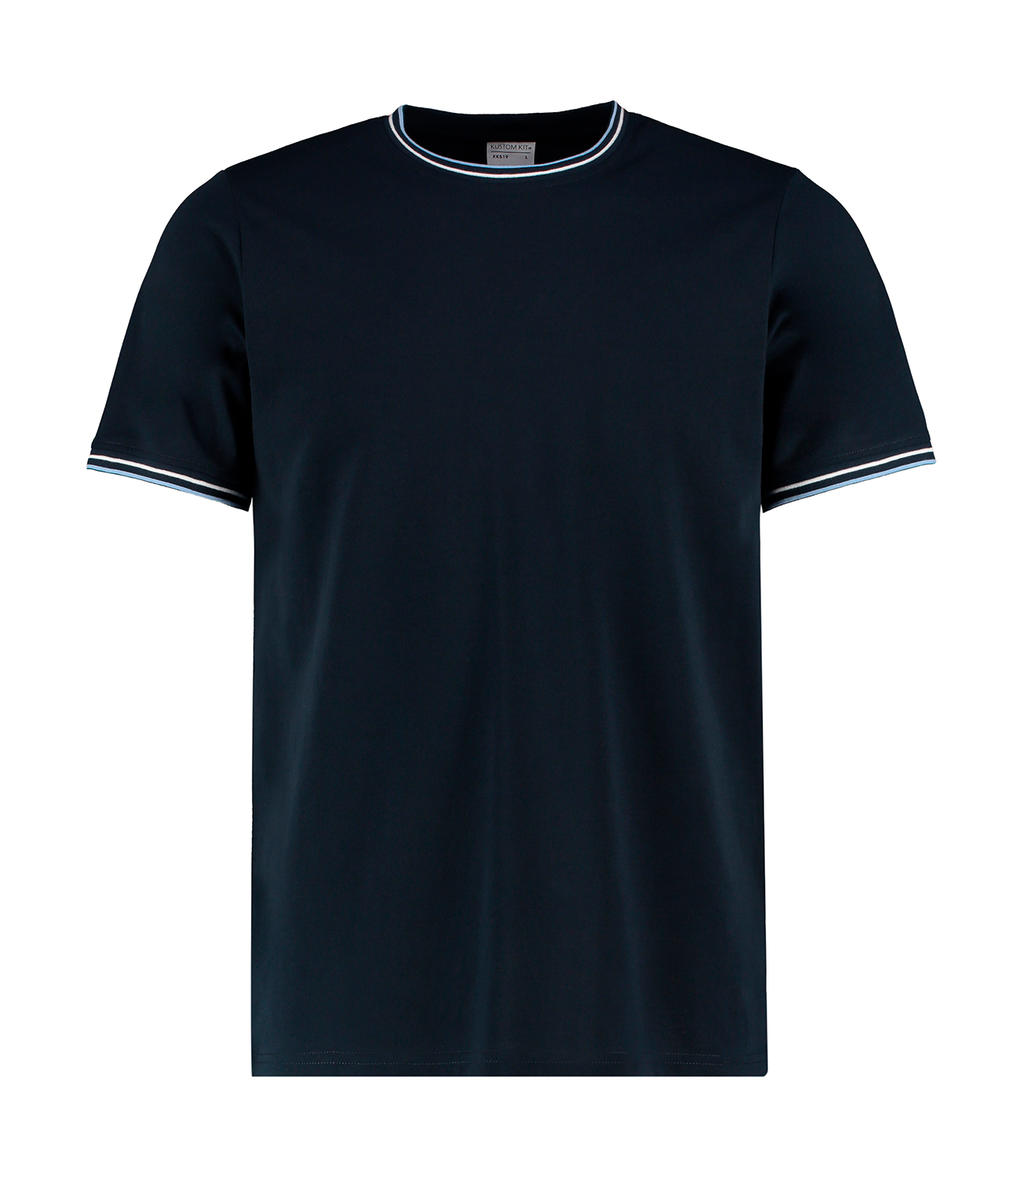 Fashion Fit Tipped Tee - navy/white/light blue